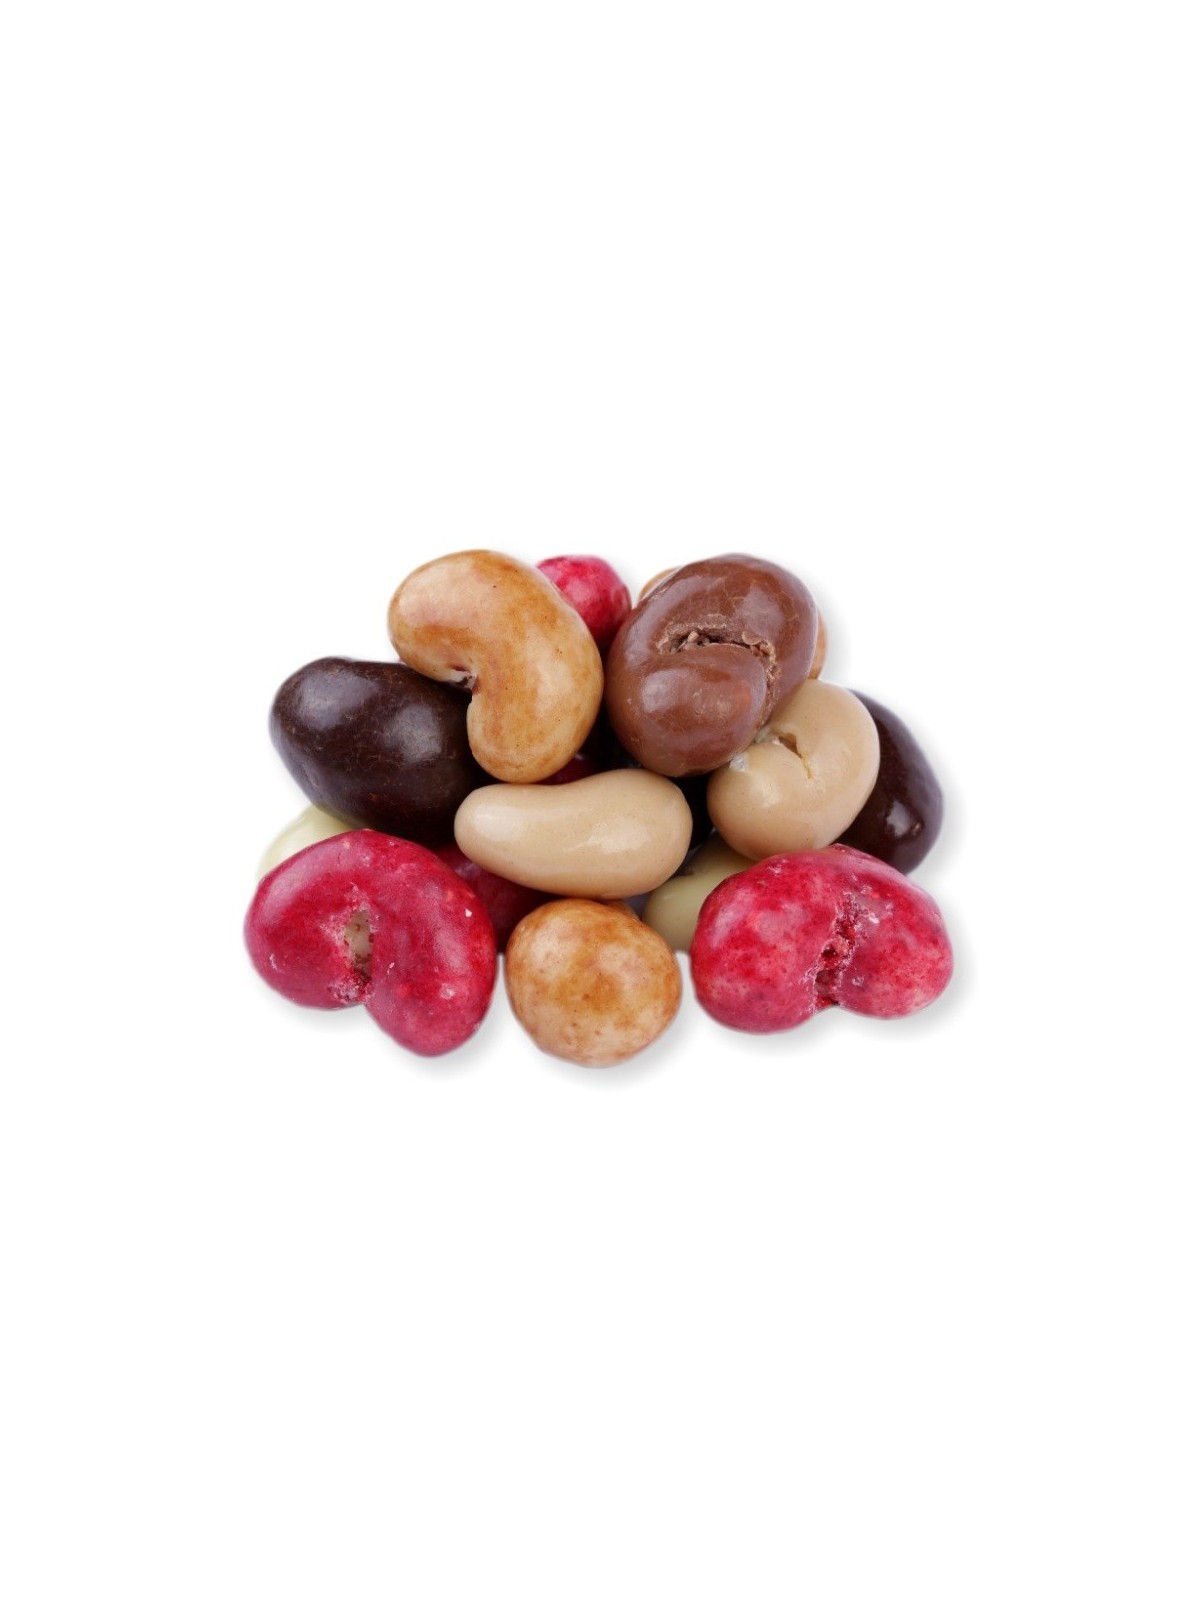 Cashew nuts in chocolate - mix - 200g